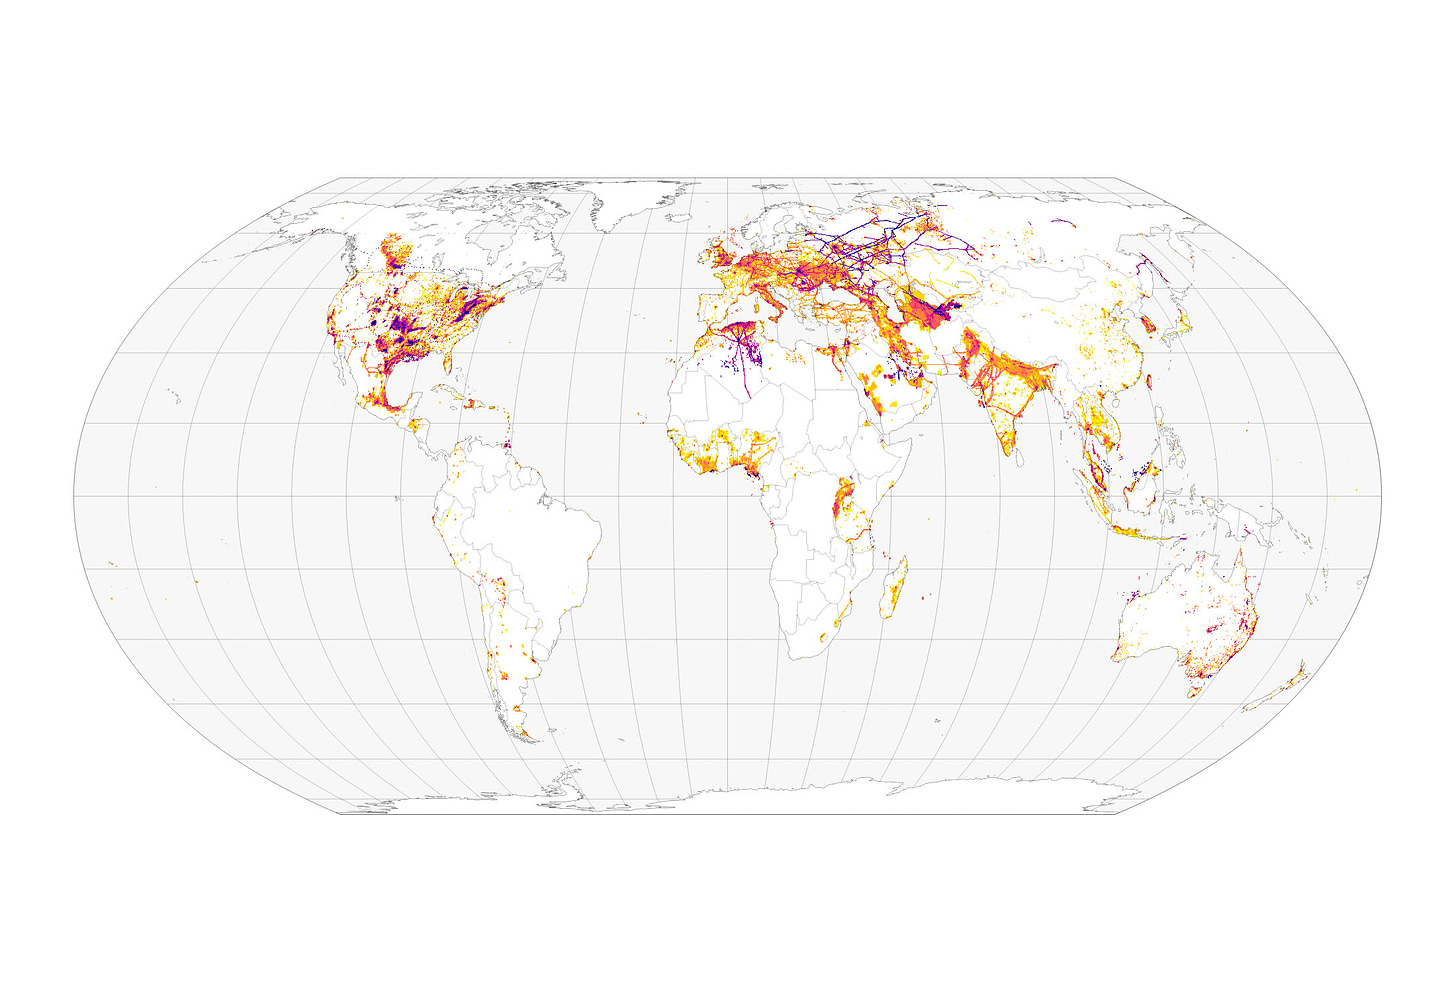 map of greenhouse gas emissions in the fossil fuel industry as seen by nasa